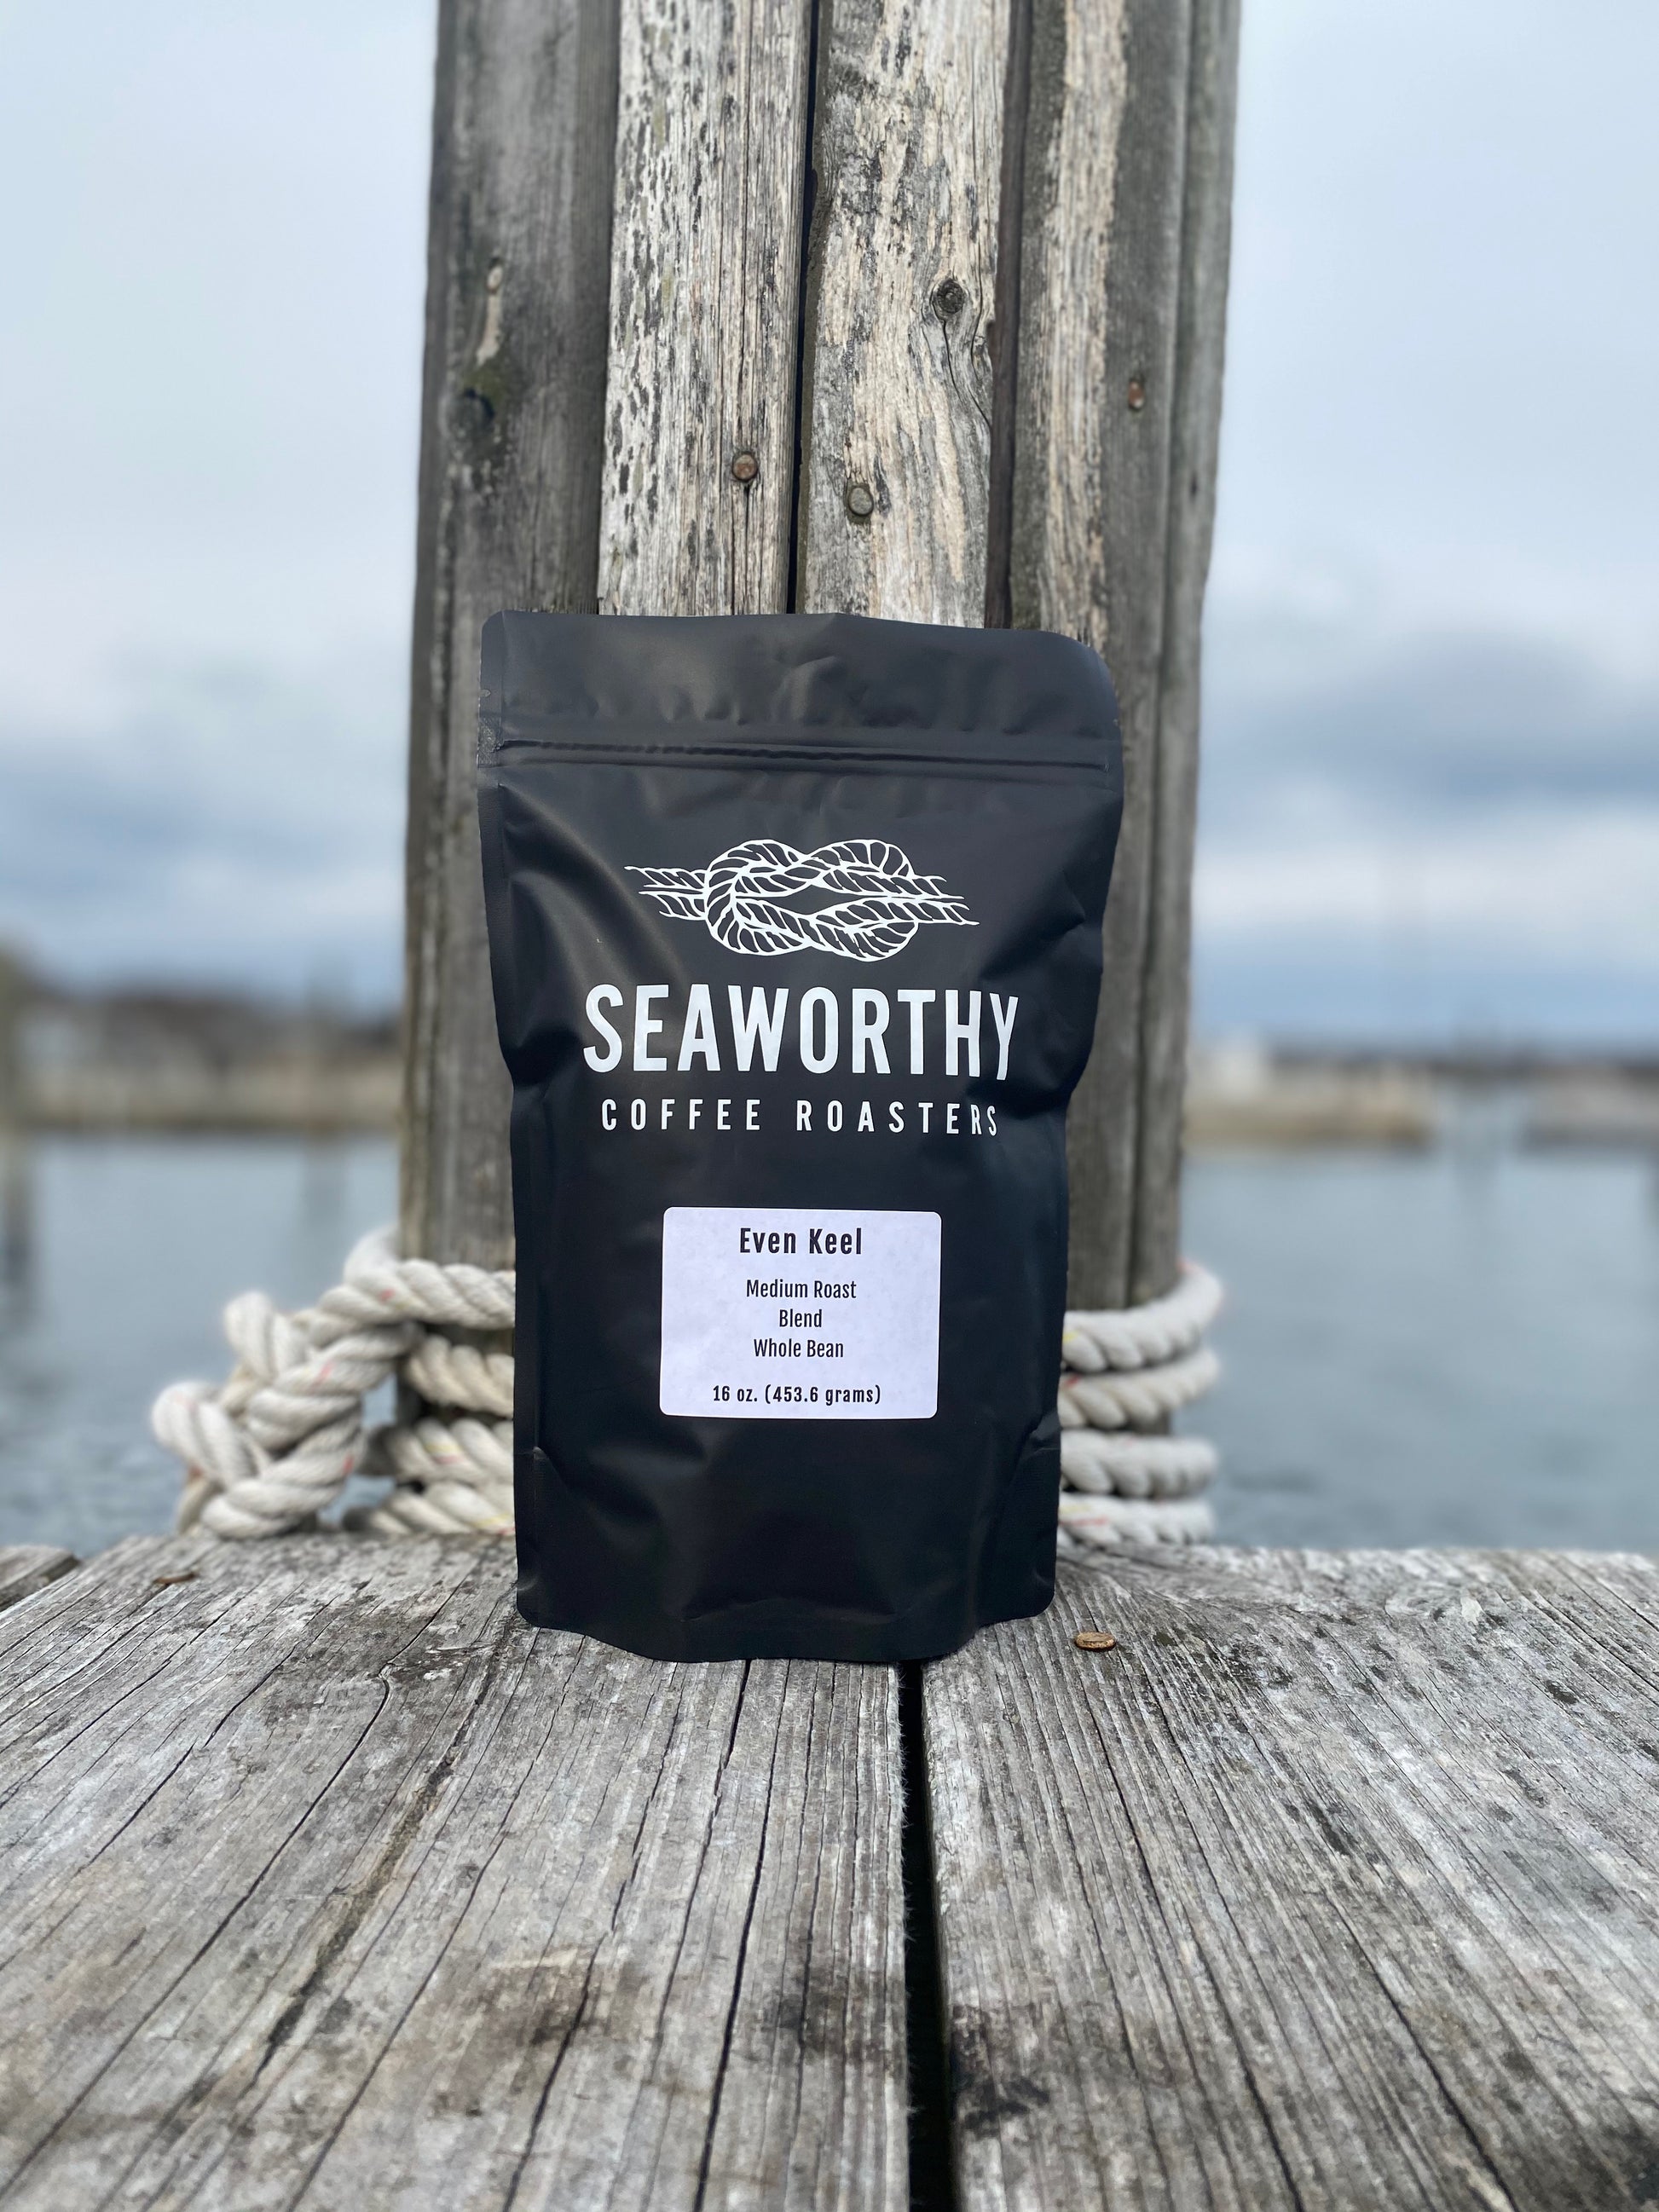 Our #1 seller, Even Keel is a real crowd pleaser.  With a full body, nutty aroma, acidic mouthfeel and a smooth, clean finish...flavor bursts in your mouth with every sip from first to last.  Start your day with an Even Keel for smooth sailing.